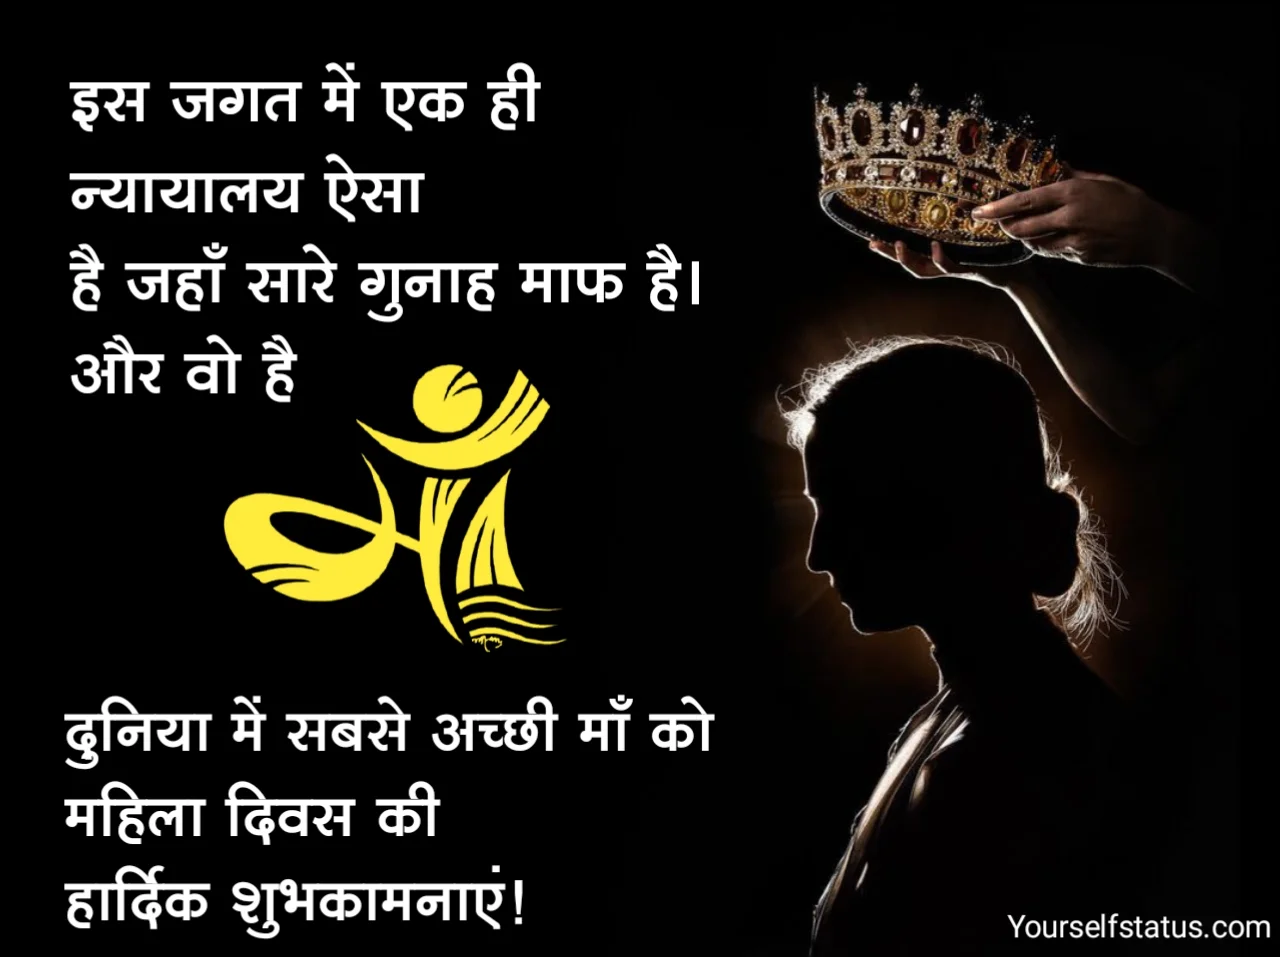 women's day wishes for mom in hindi